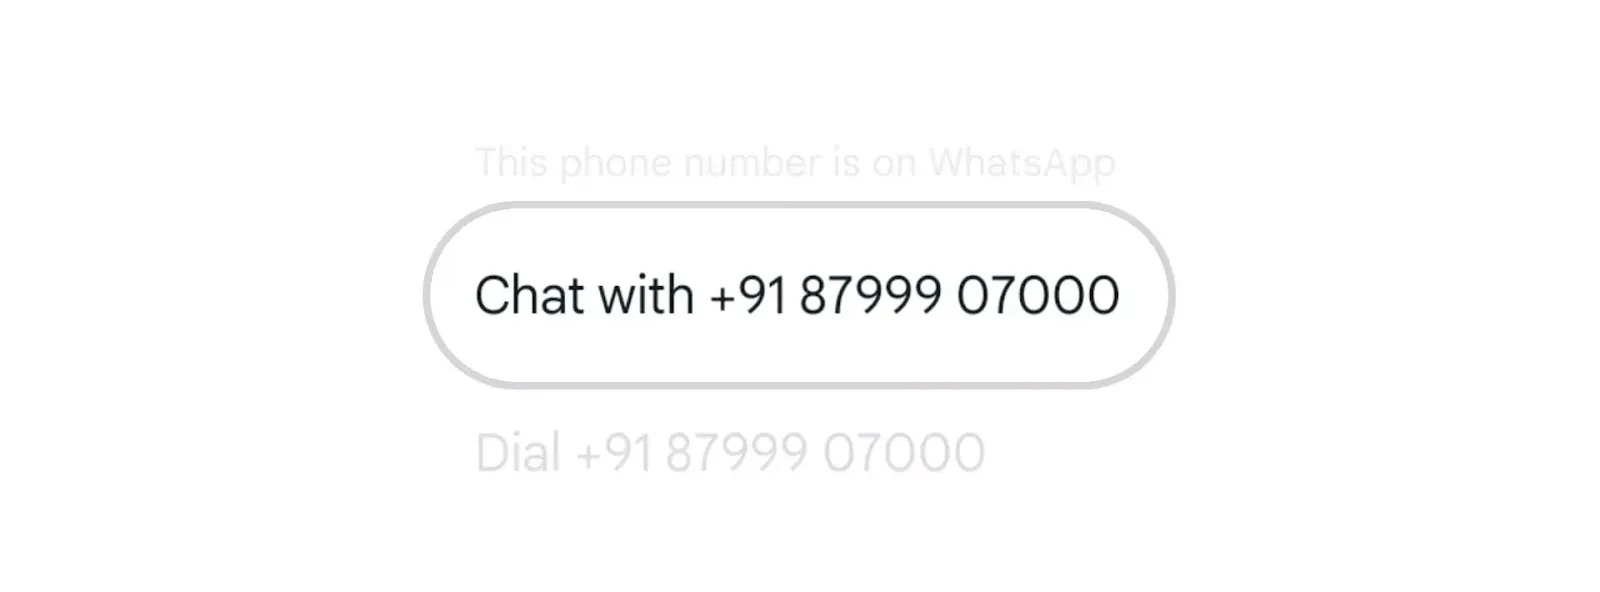 How To Send WhatsApp Message Without Saving Number